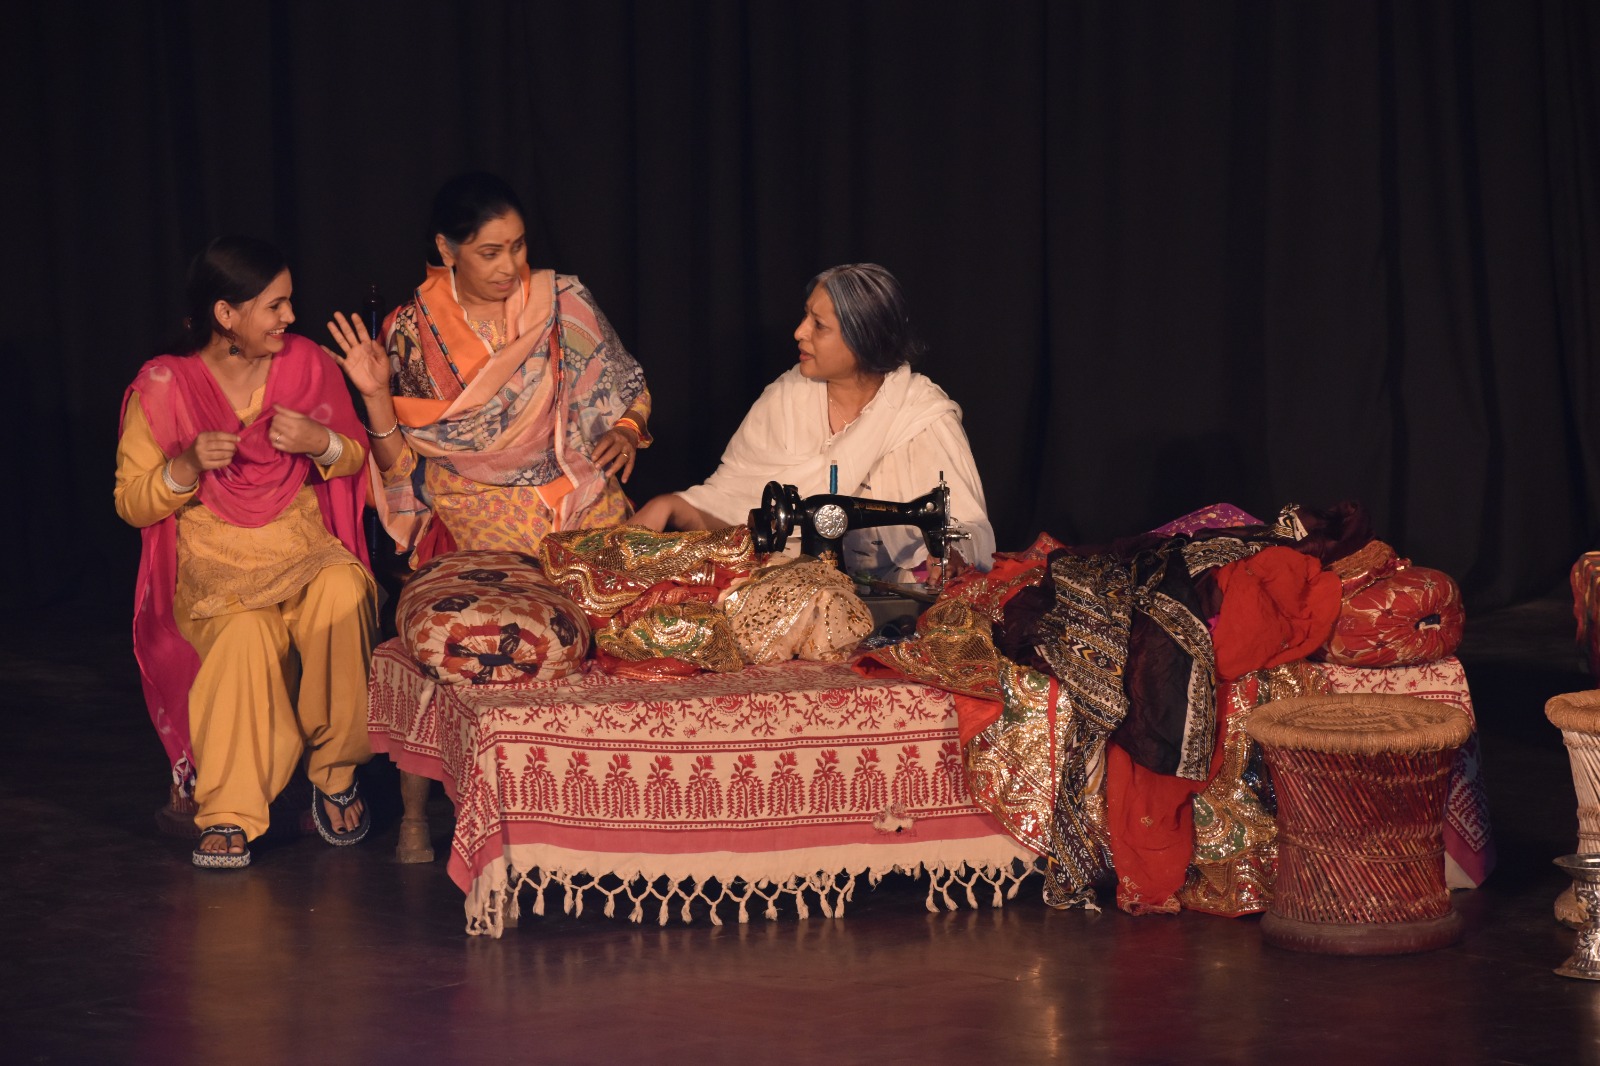 https://www.hindi.awazthevoice.in/upload/news/170350737221_An_attempt_to_make_the_society_aware_through_the_theatrical_adaptation_of_Ismat_Chughtai's_‘Chauthi_Ka_Joda’_4.jpg